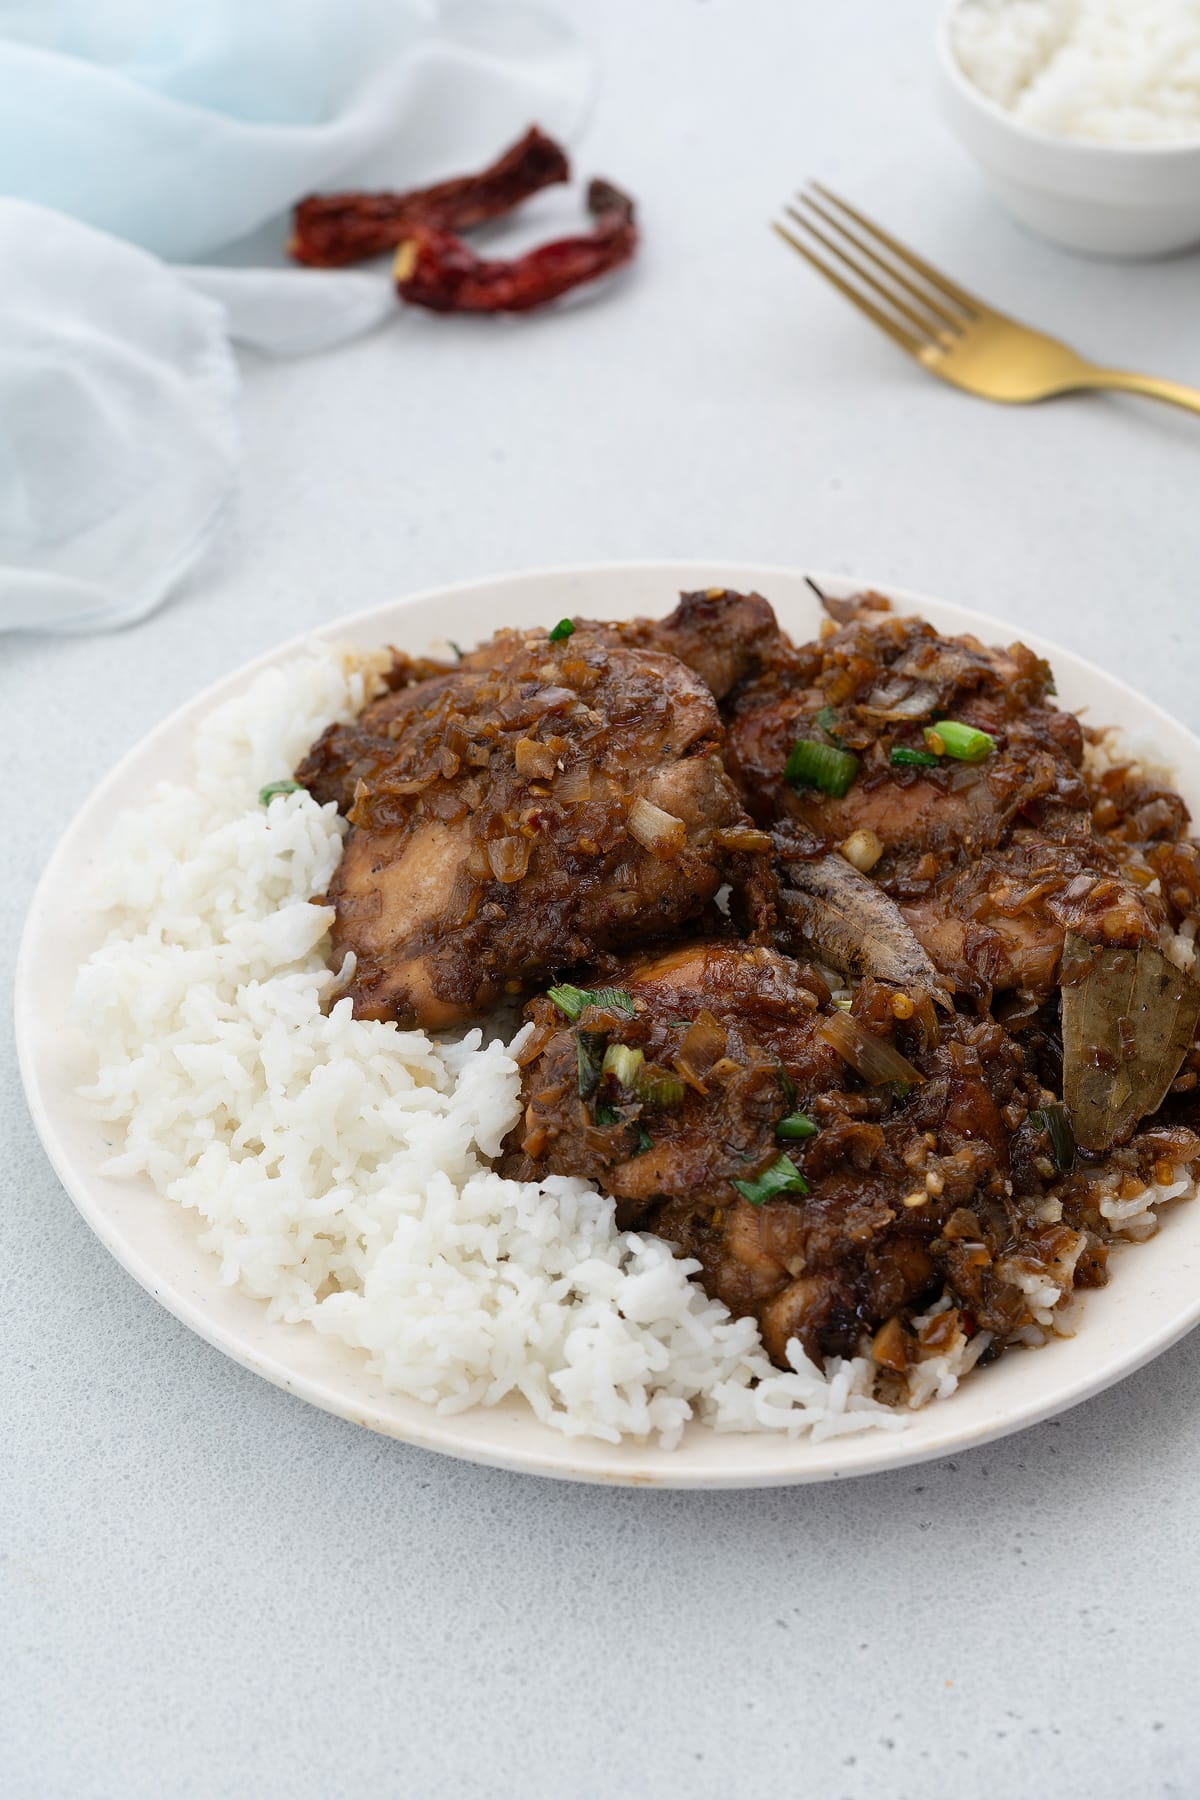 Filipino chicken adobo served on a white plate with a side of rice, accompanied by a golden fork, a cup of rice, and chili, all arranged on a white table.